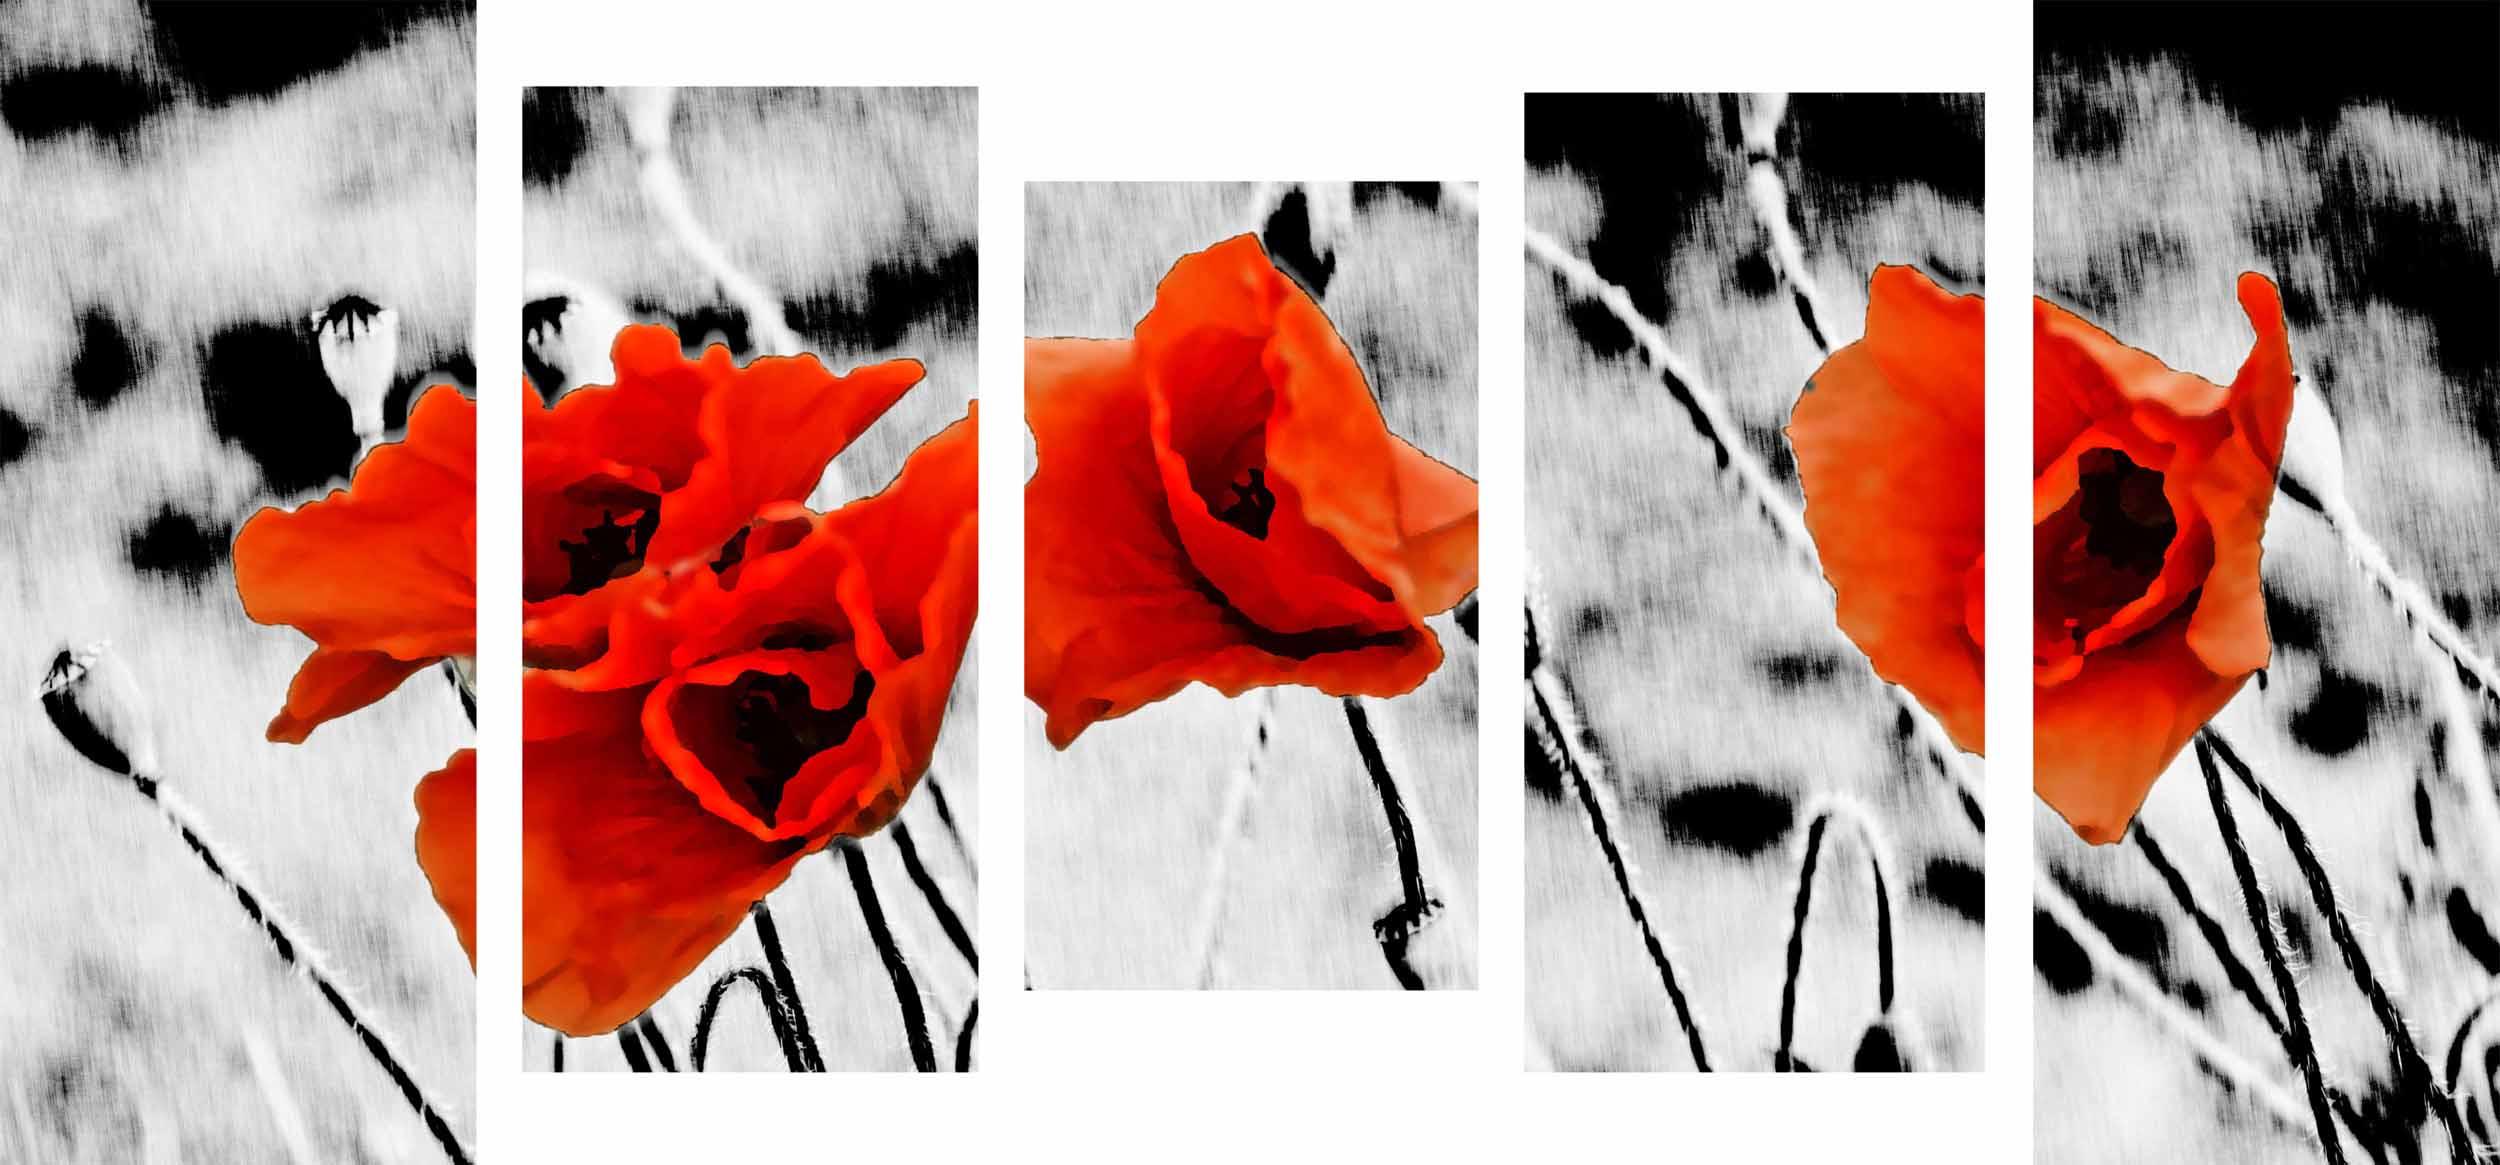 Picture Modular picture - poppies on a white background 3